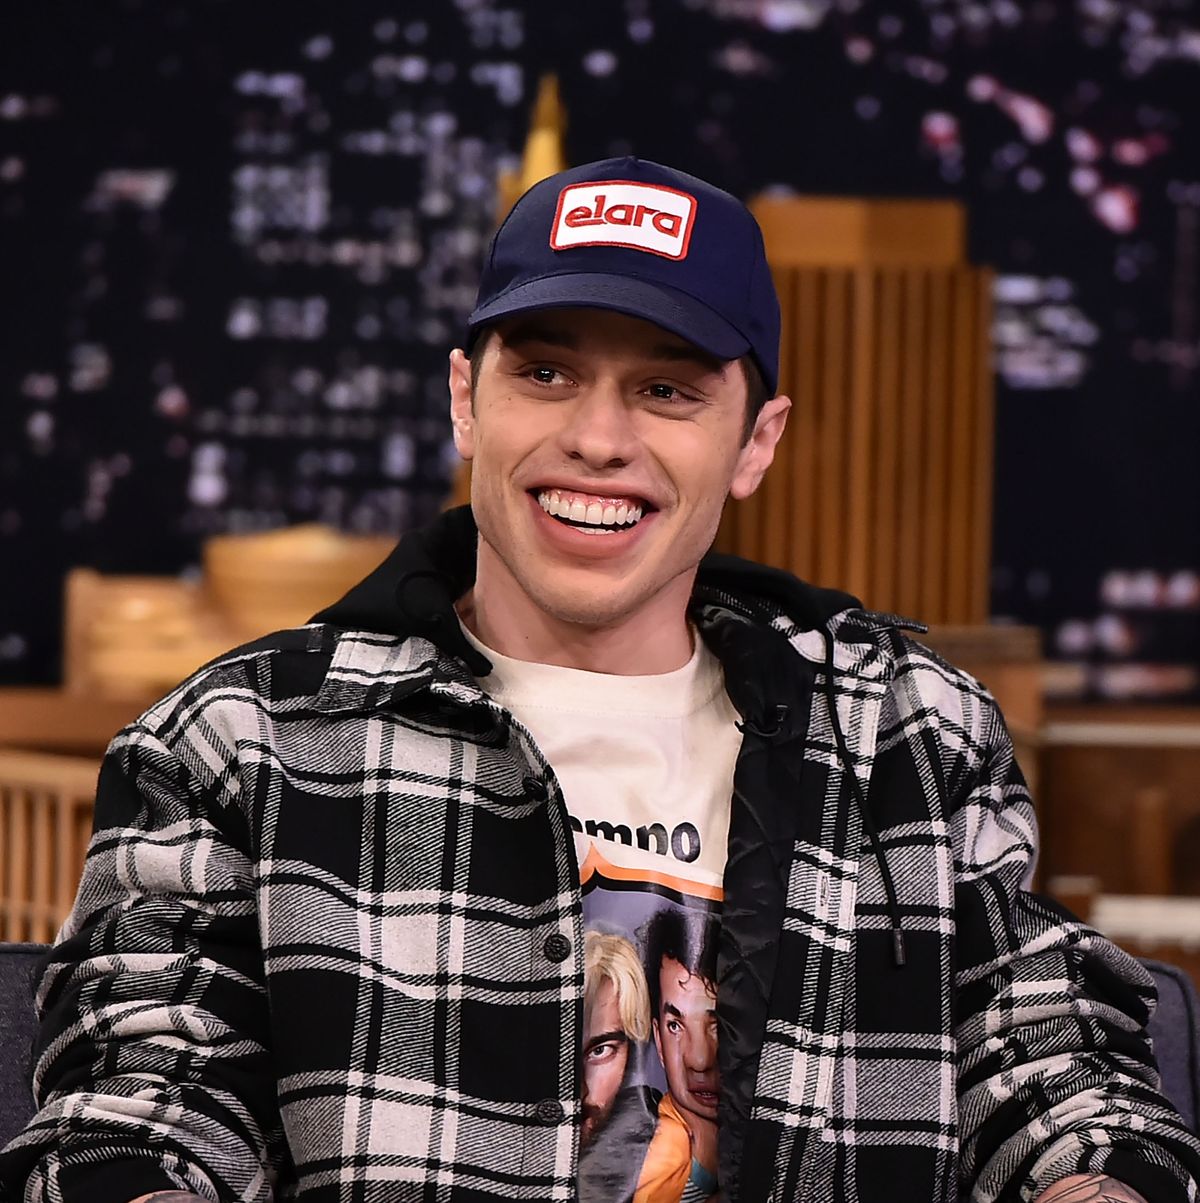 Pete Davidson Opened Up About His Ex Girlfriends in New Interview